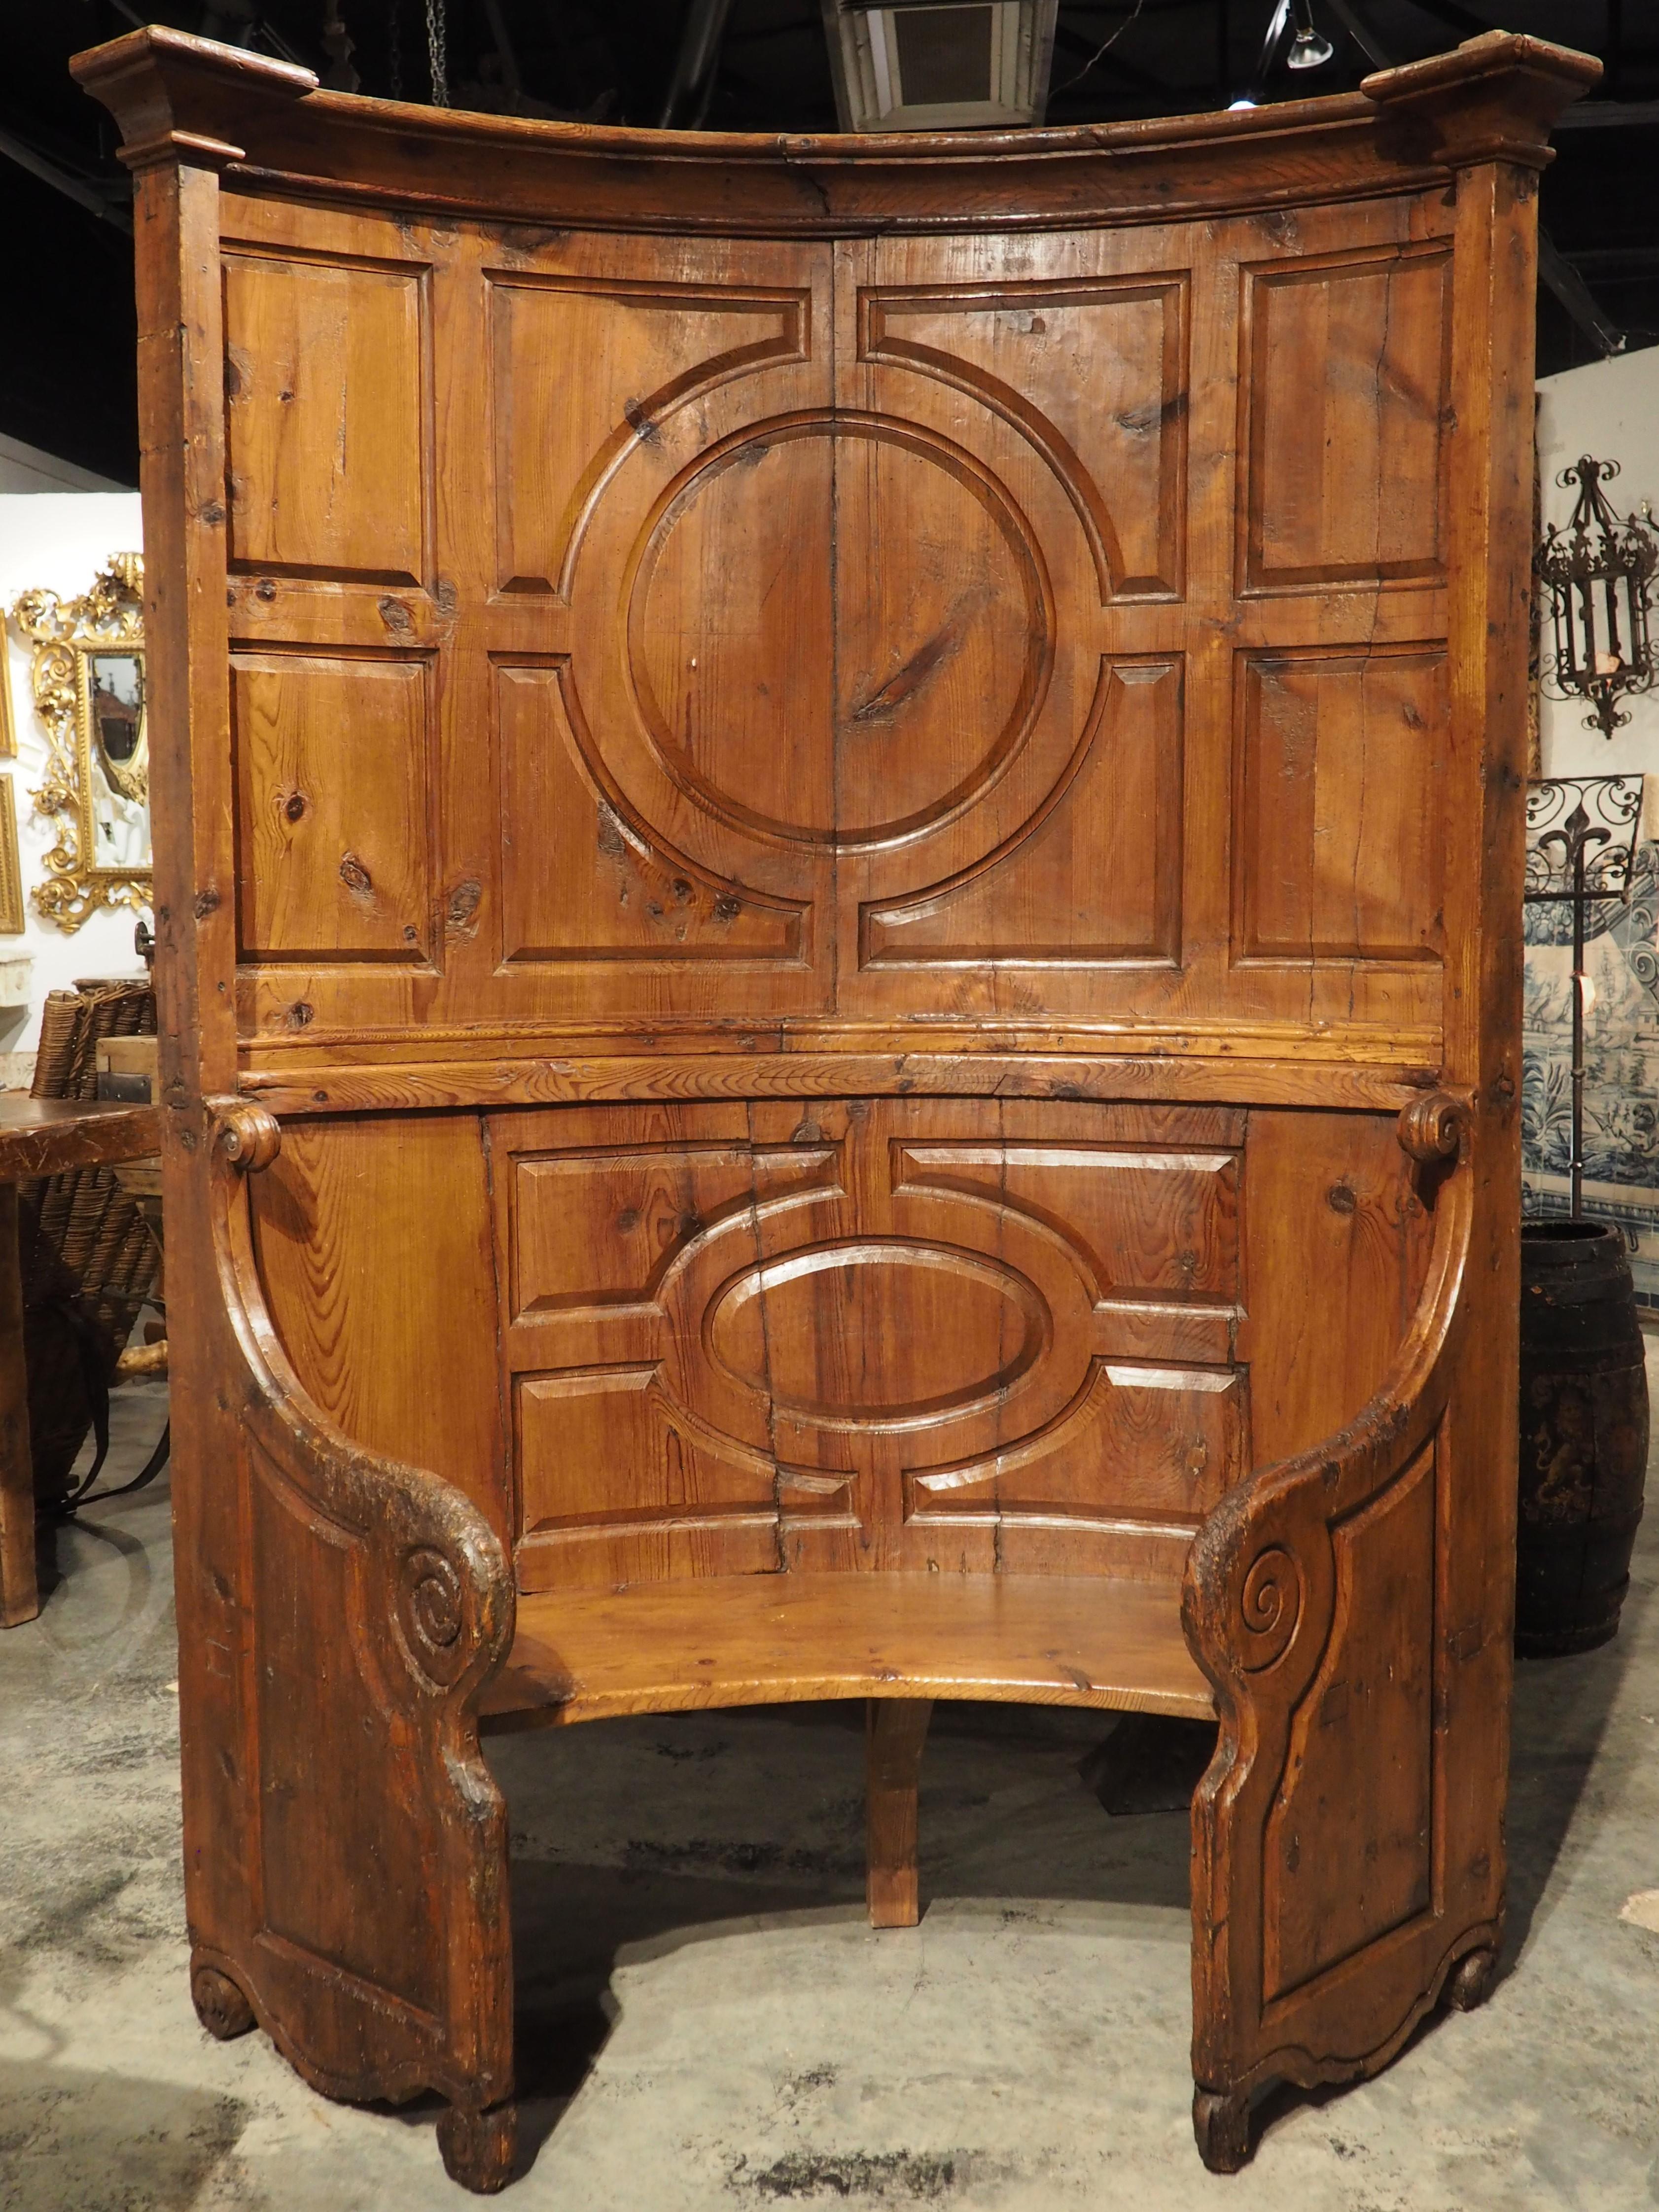 Curved circa 1700 North Italian Choir Chair in Carved Larch Wood For Sale 15